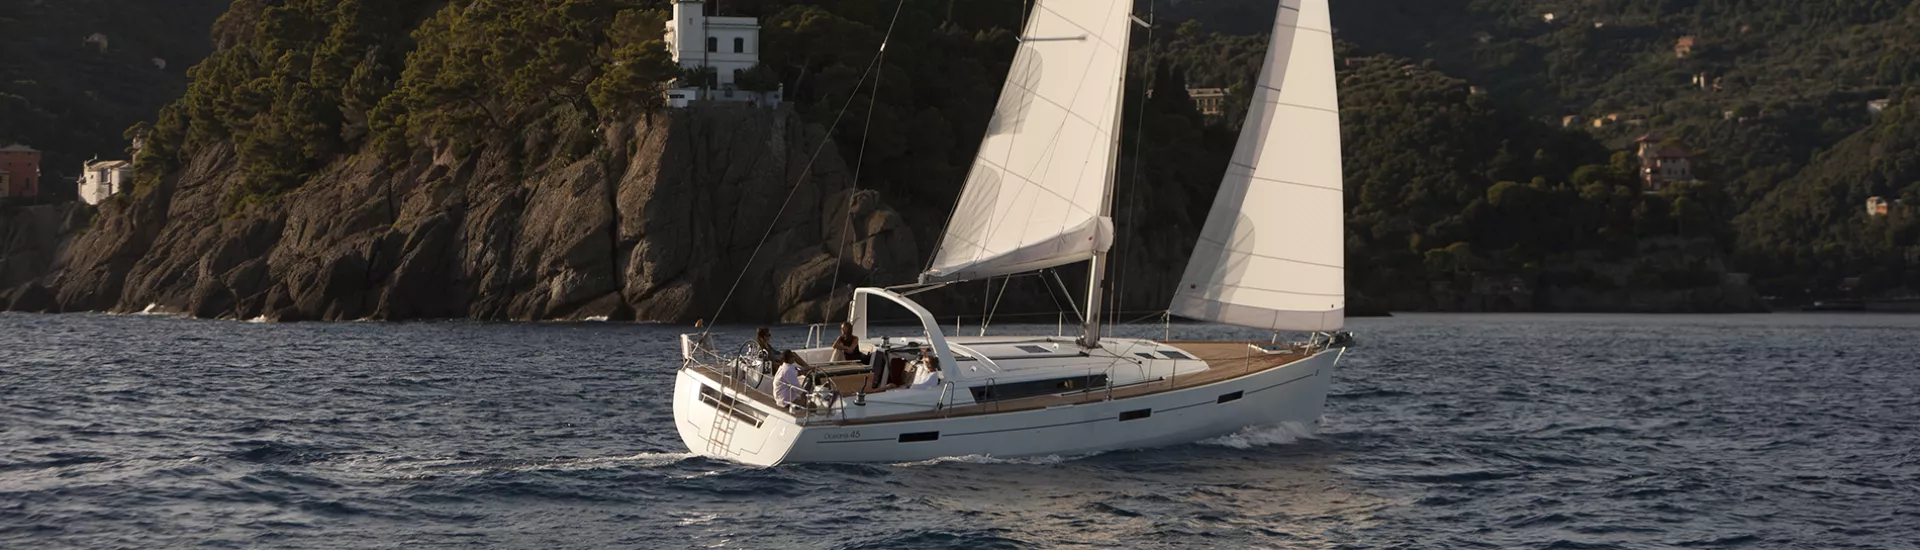 45 foot sailing yacht for sale